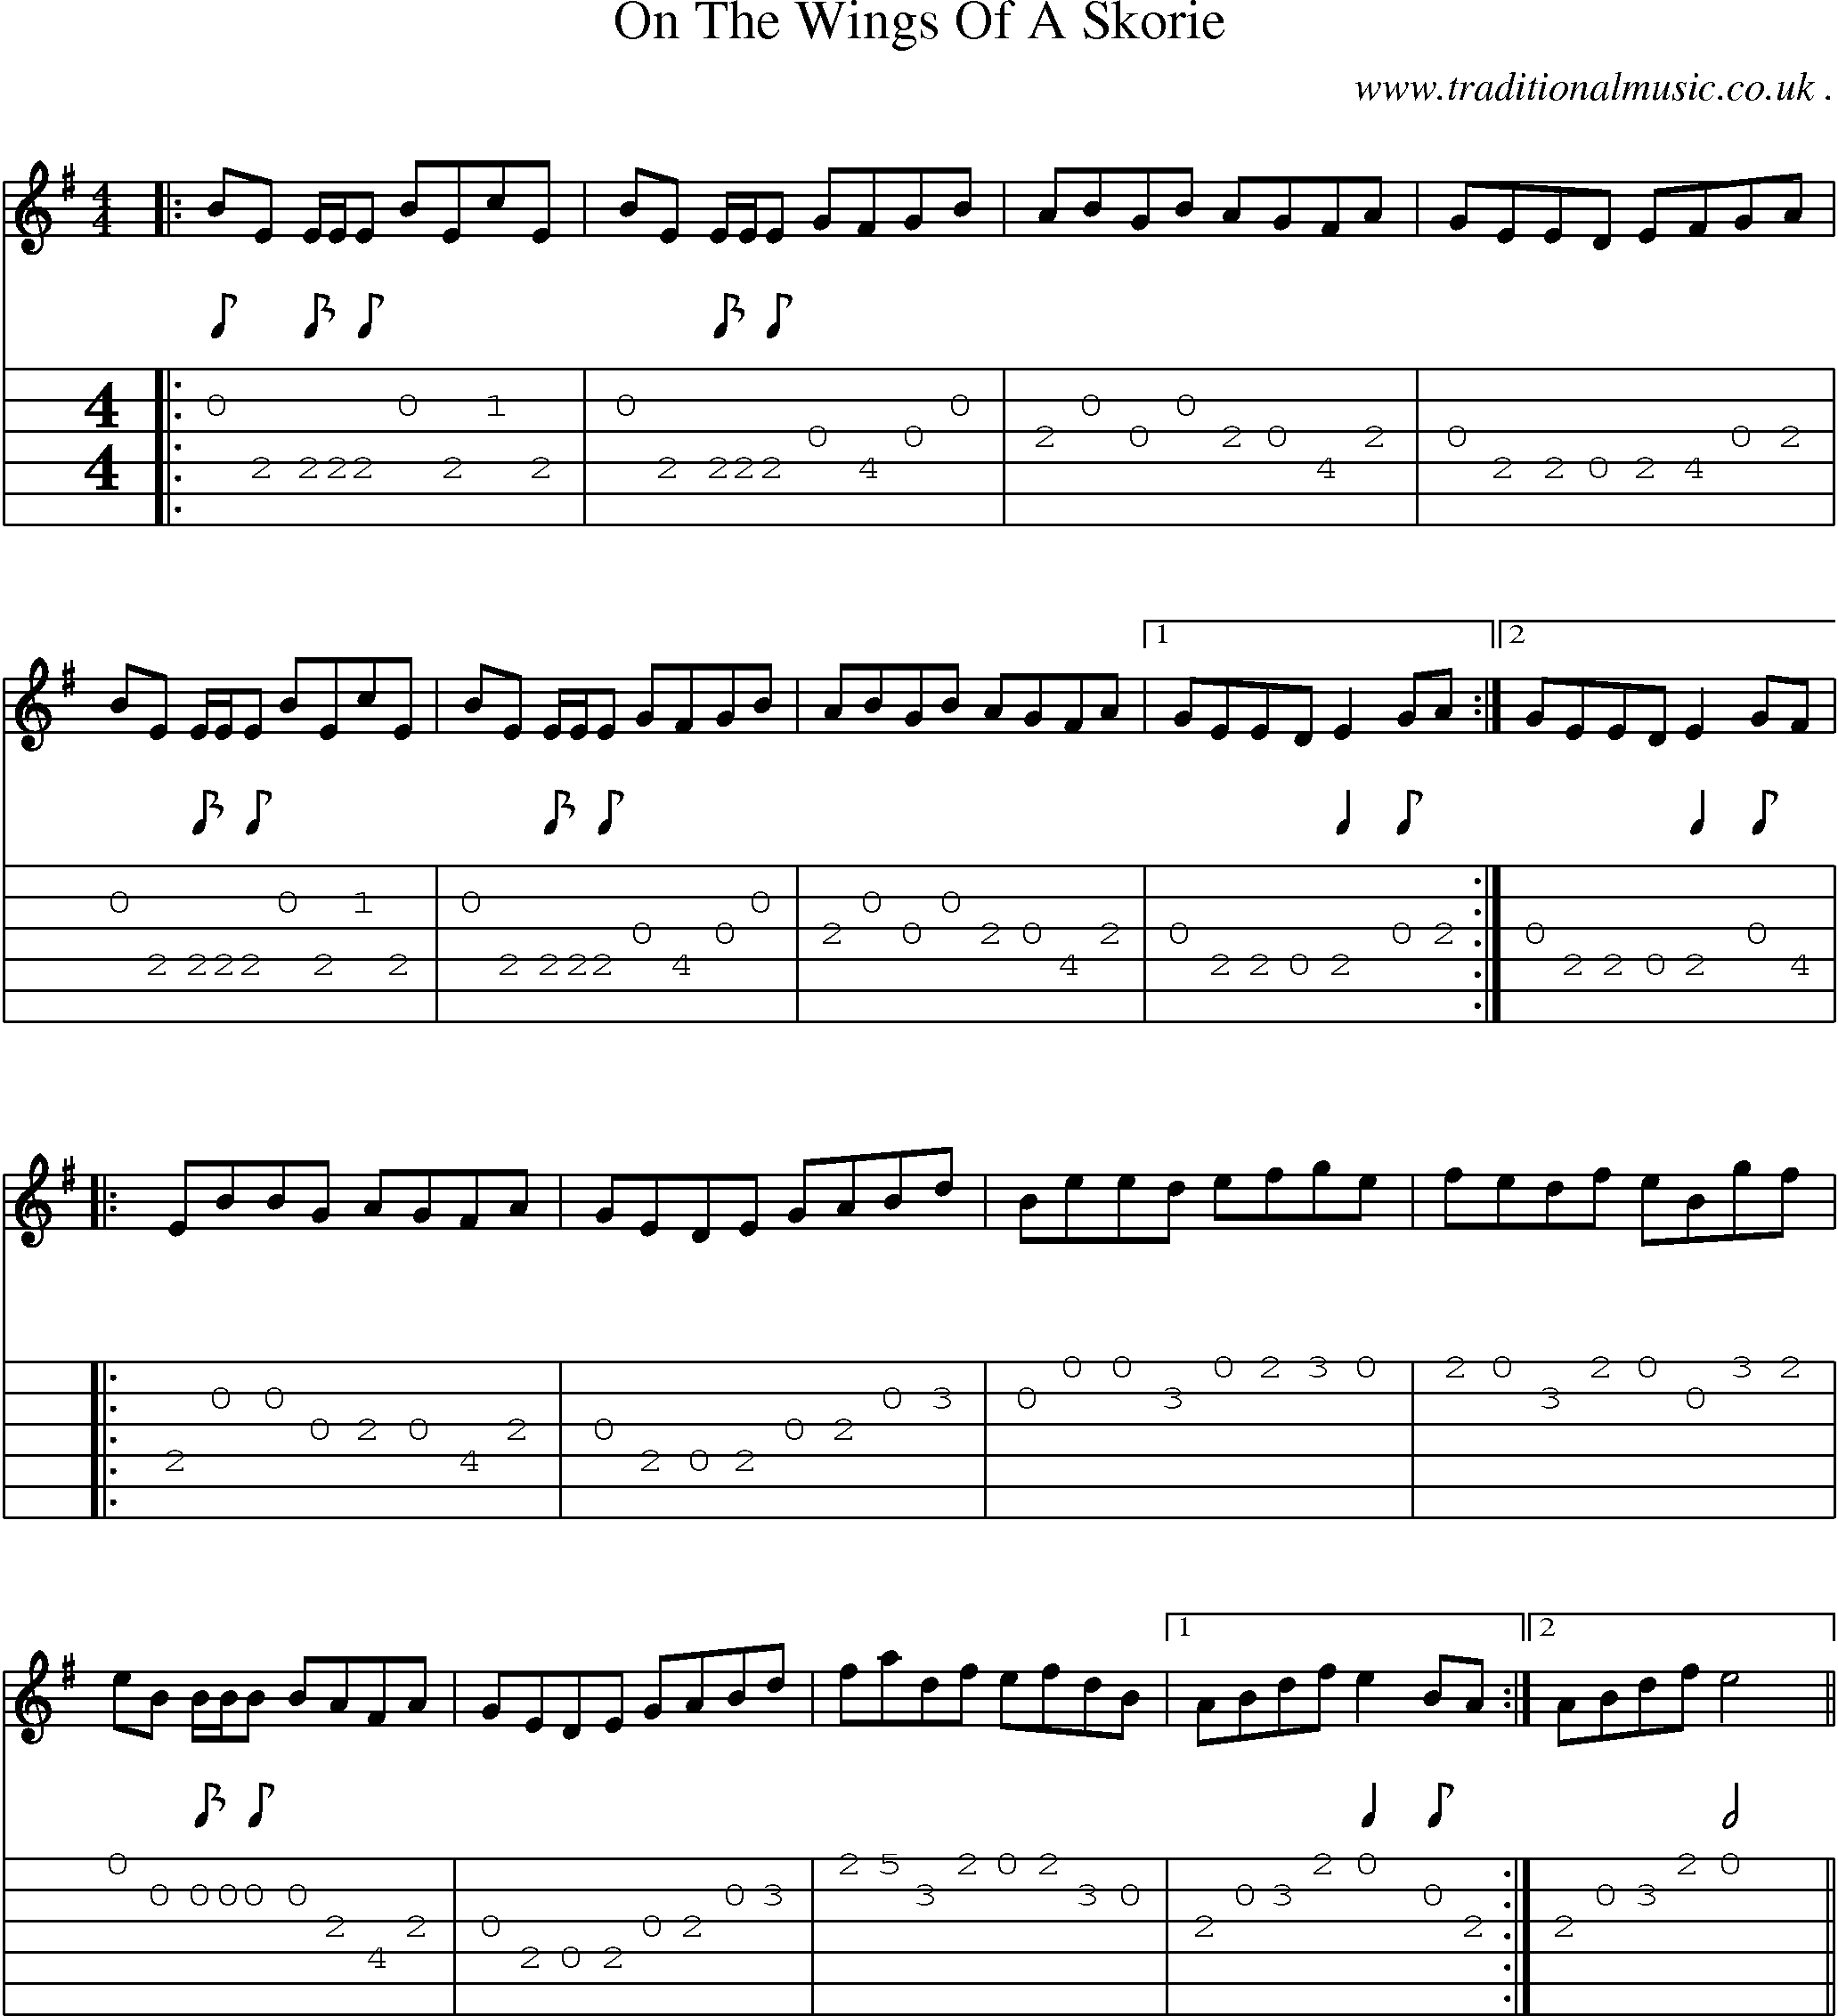 Sheet-Music and Guitar Tabs for On The Wings Of A Skorie